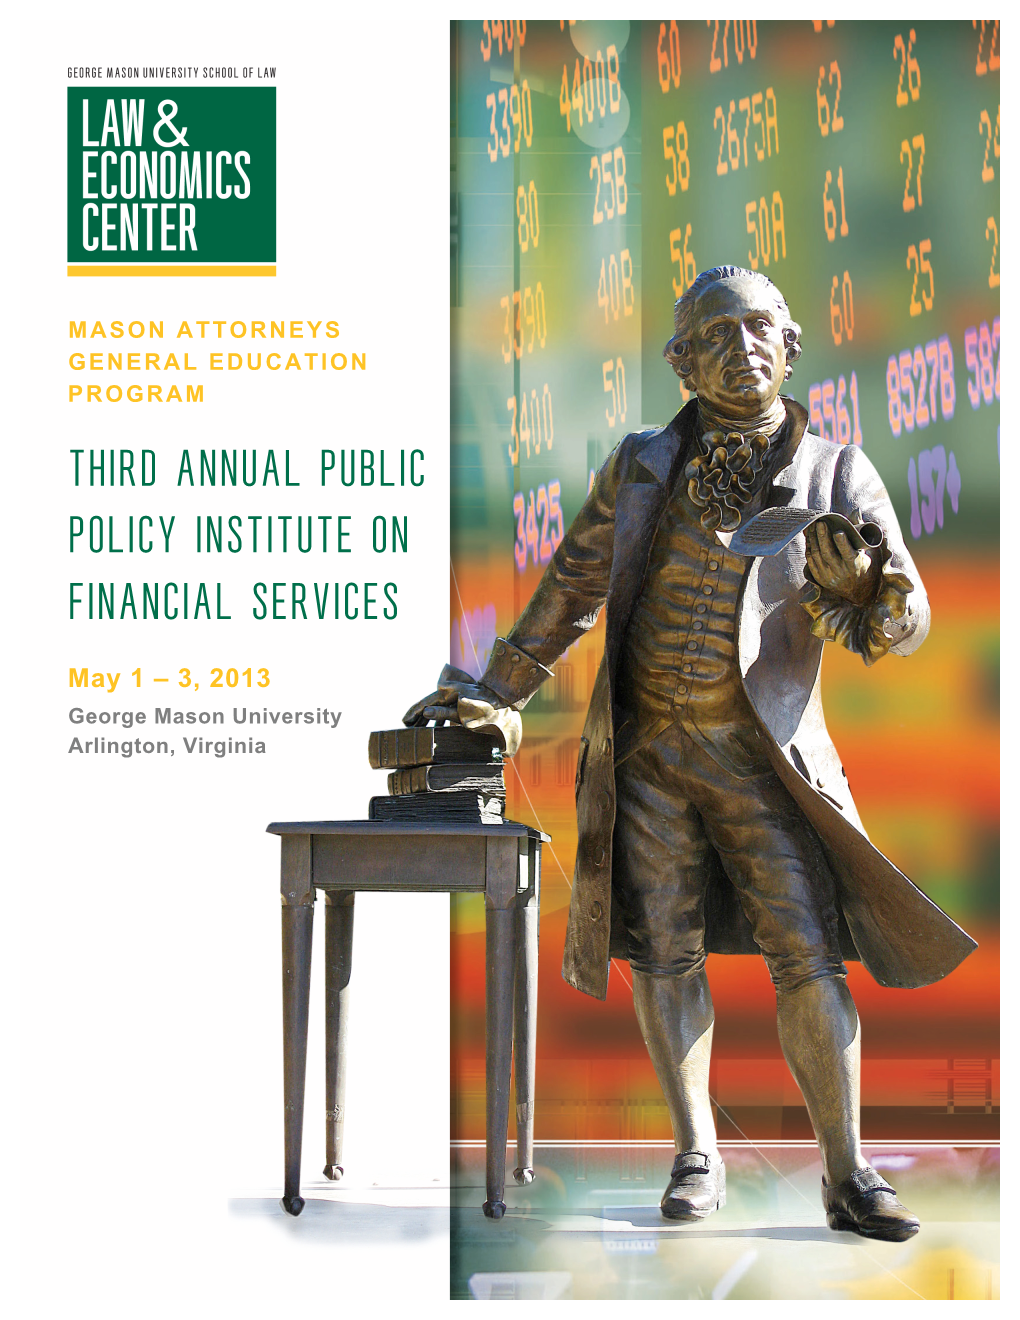 Third Annual Public Policy Institute on Financial Services